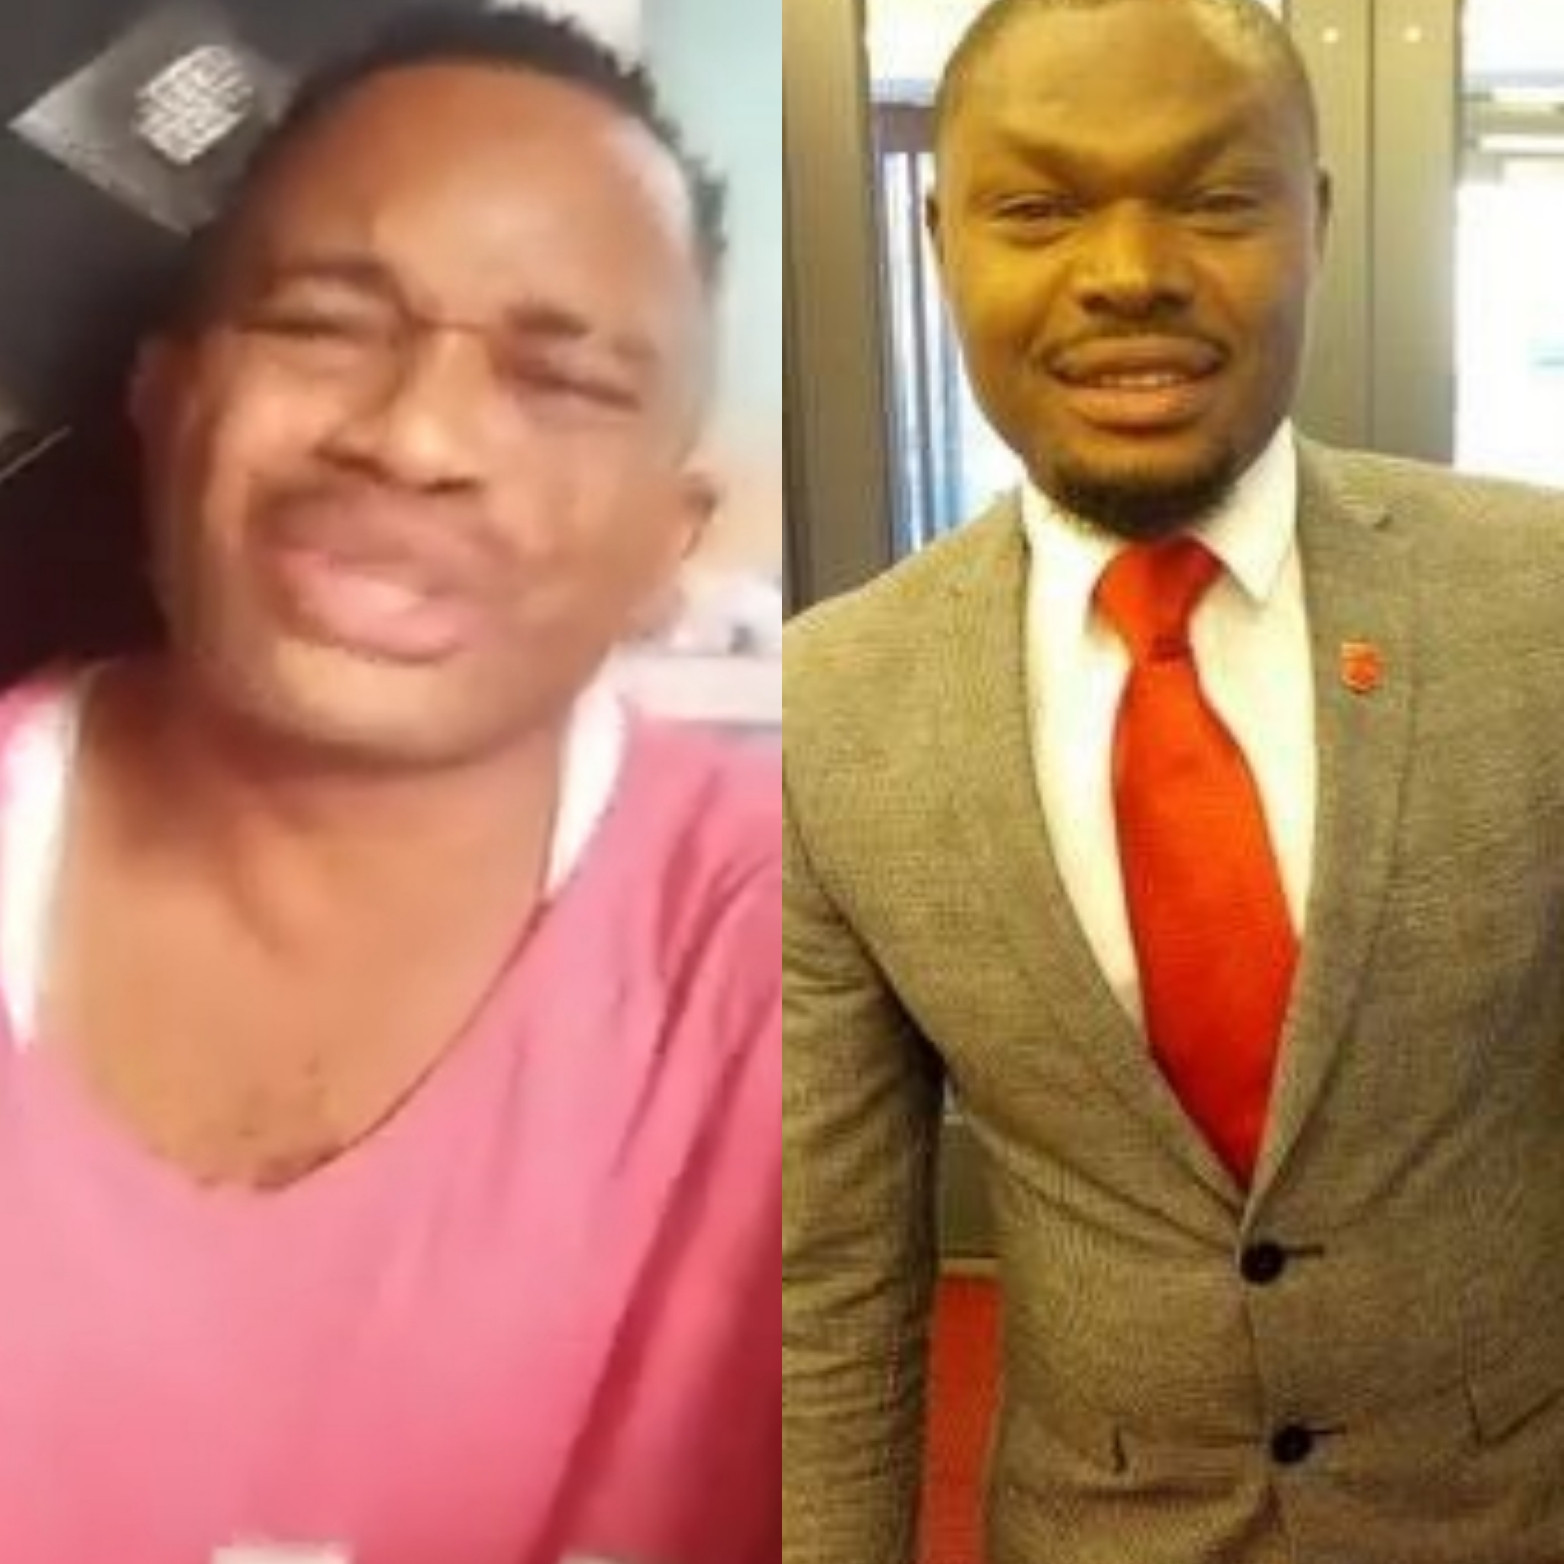 "Give me the money Ibori donated for my treatment" Ailing actor cries as he accuses human rights activist, Harrison Gwamishu, of withholding money donated for him (video)